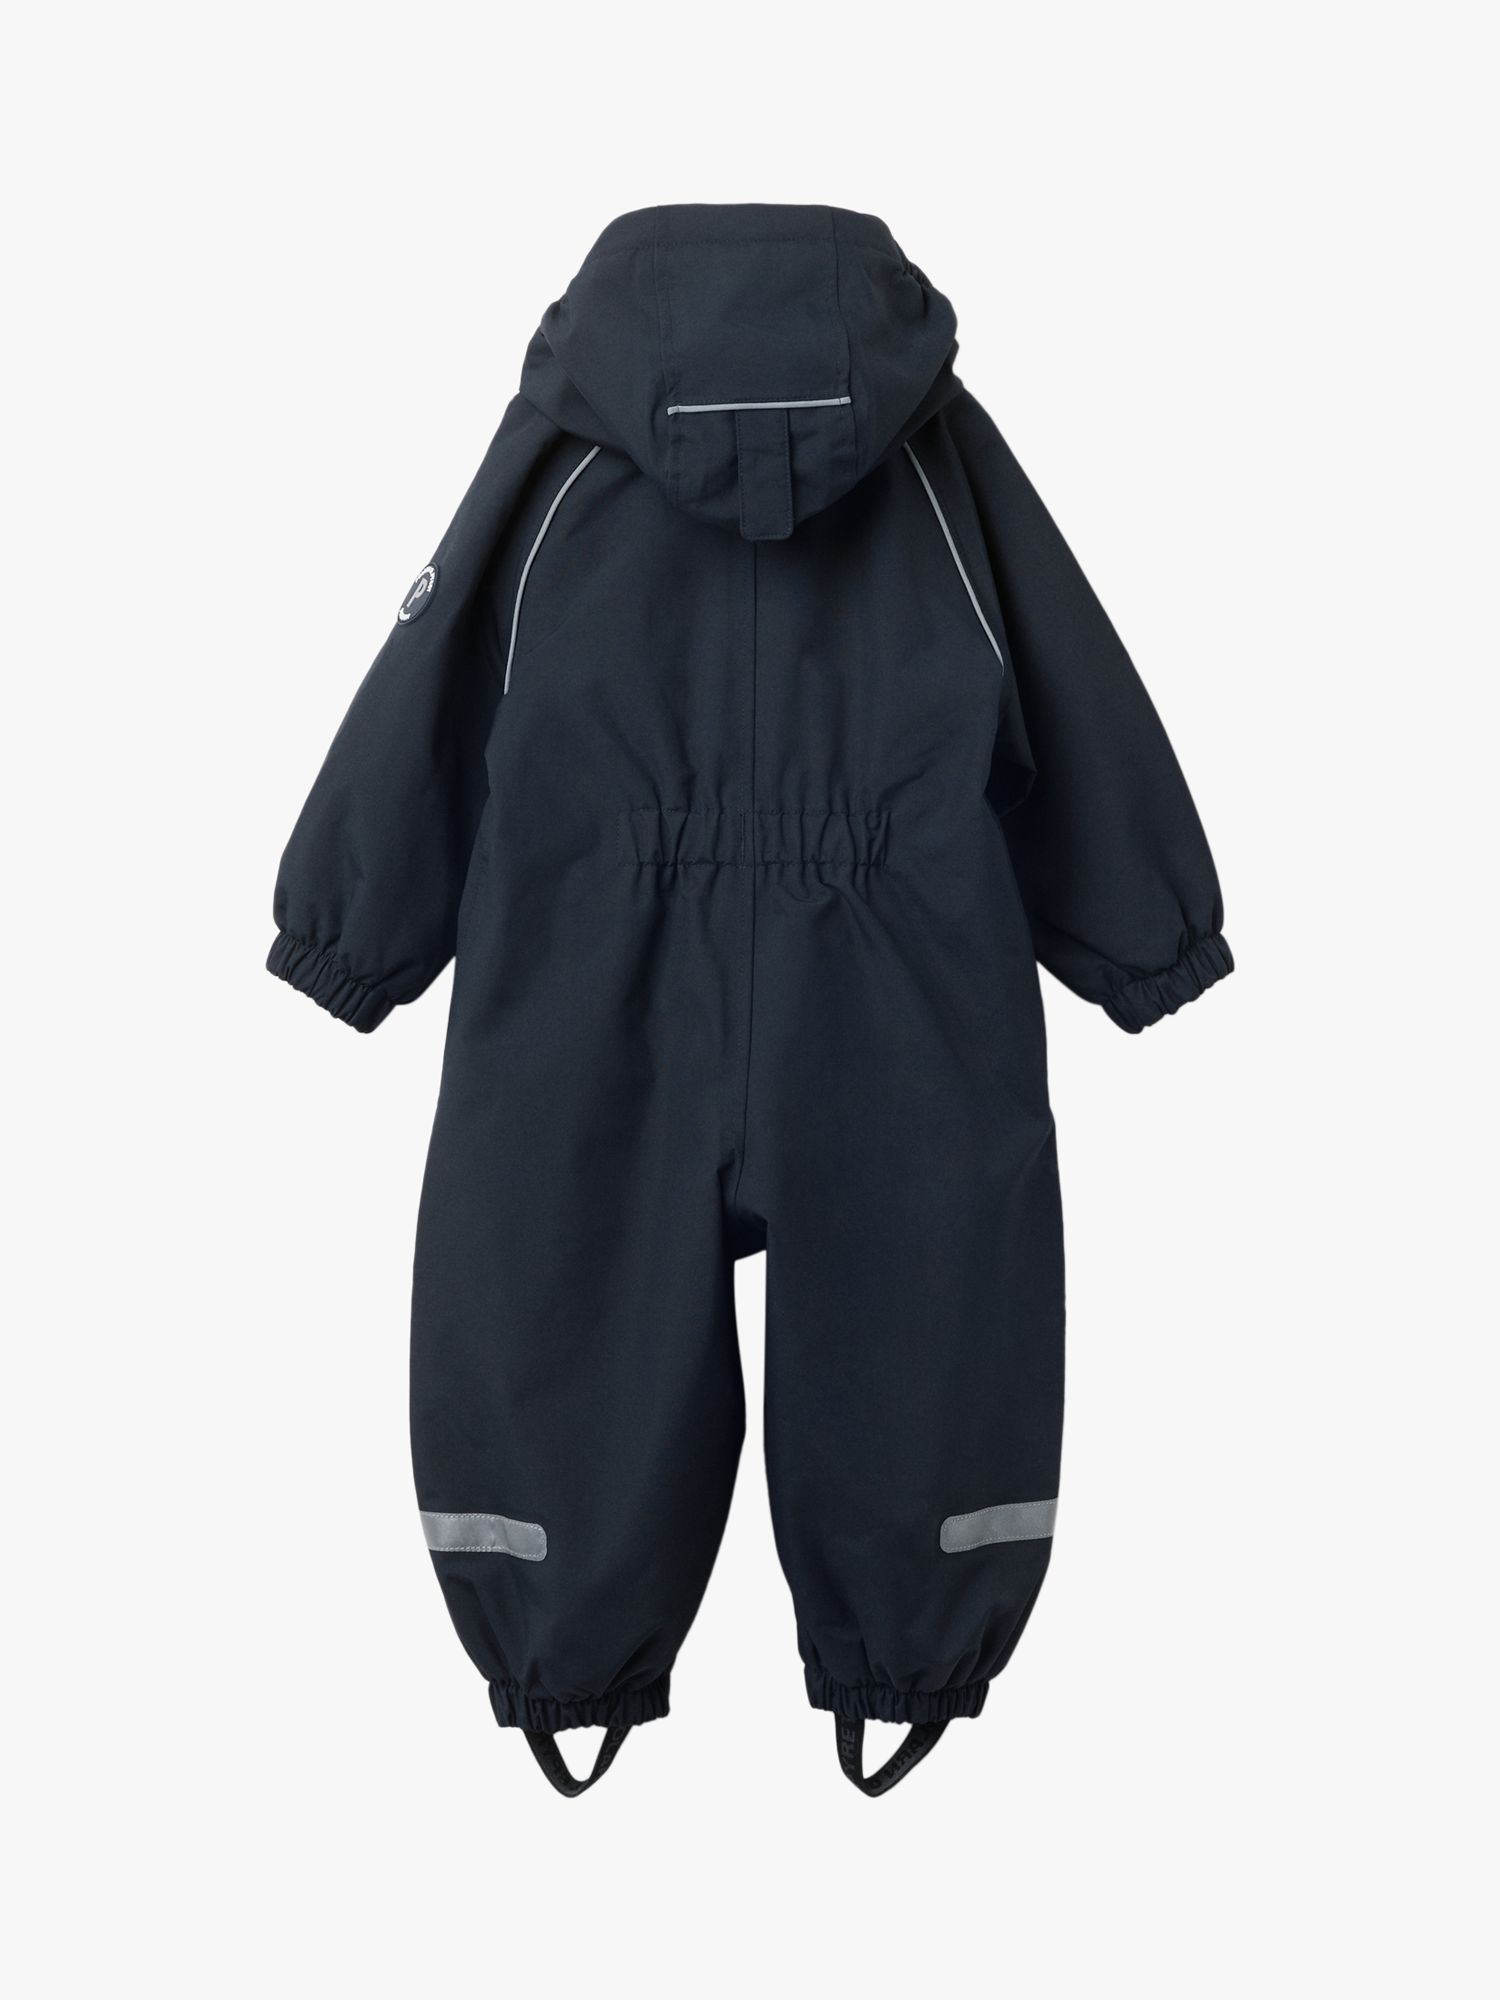 Buy Polarn O. Pyret Baby Shell Overall, Navy Online at johnlewis.com